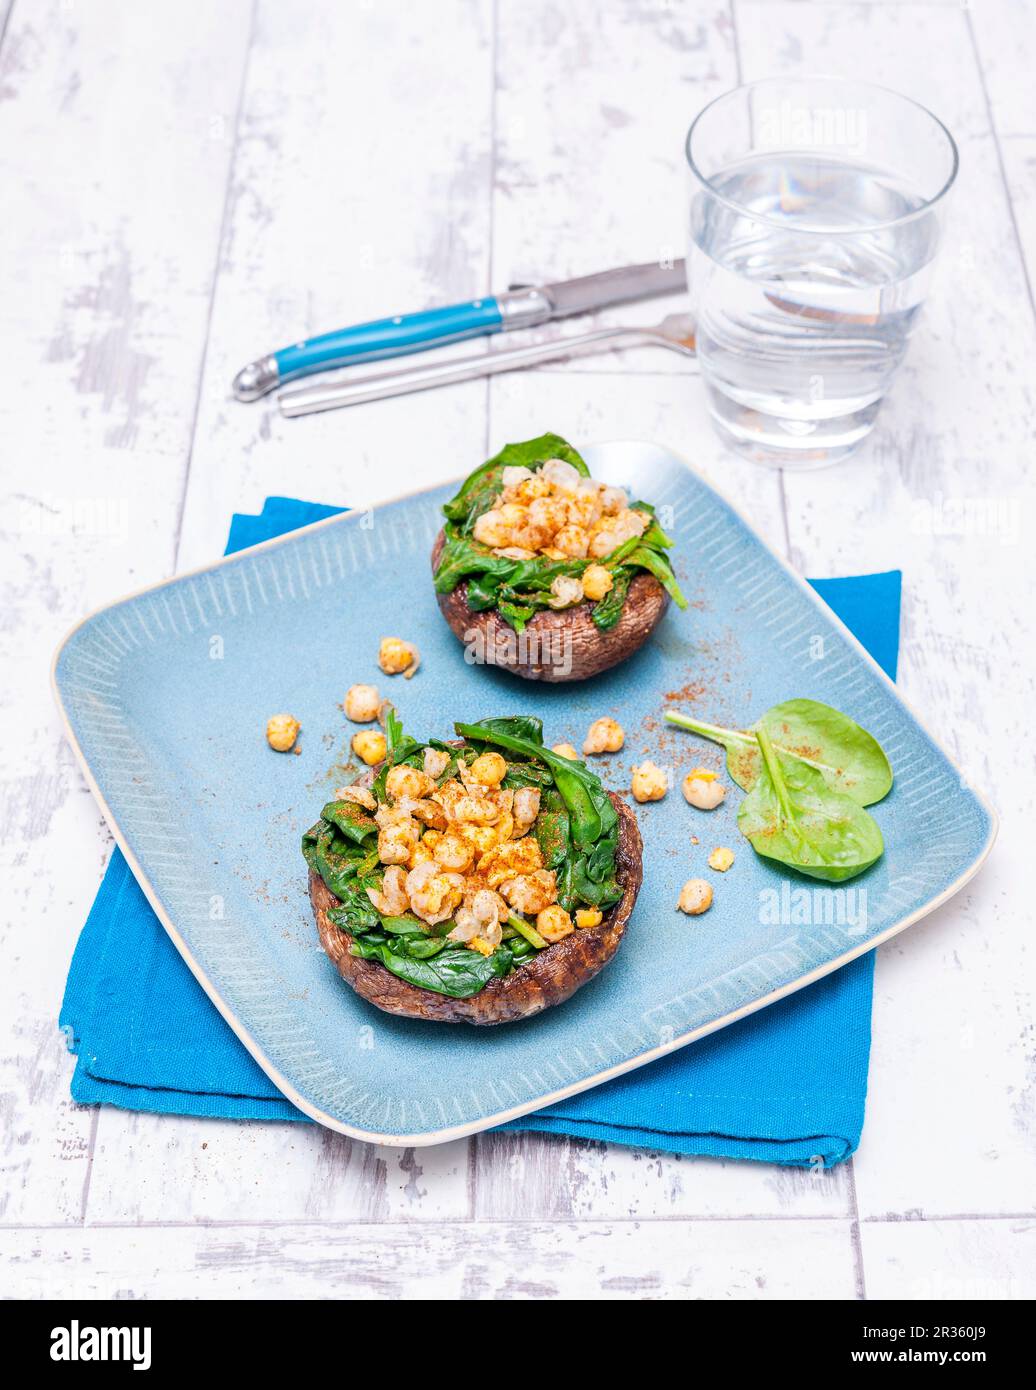 Portobello mushrooms filled with spinach and chickpeas Stock Photo